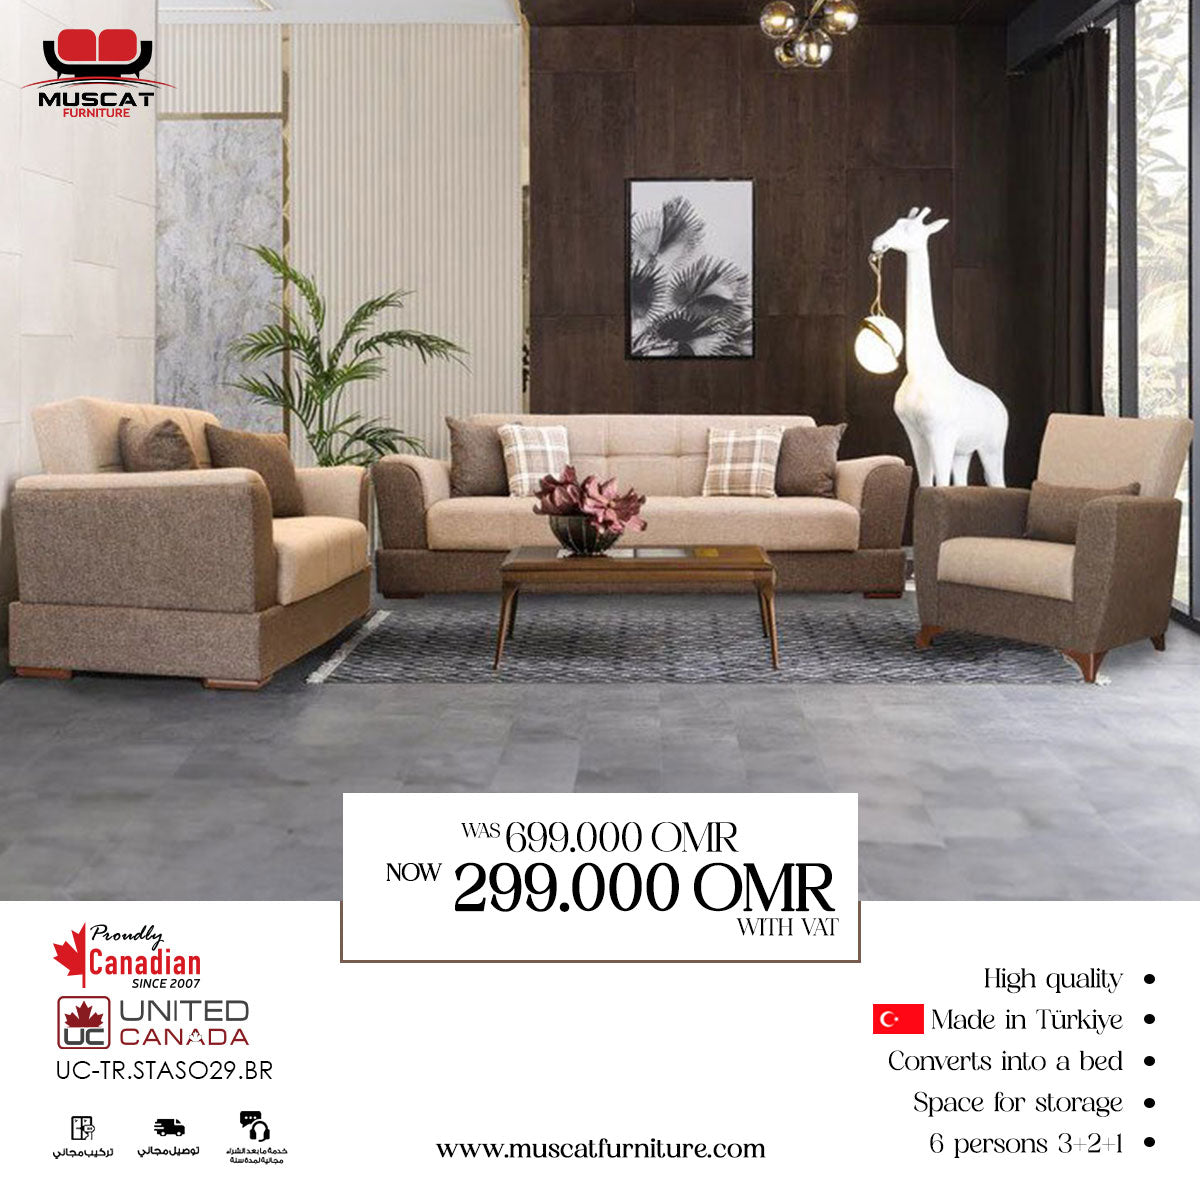 A Stallion Turkish Sofa Set with prices and all features overview